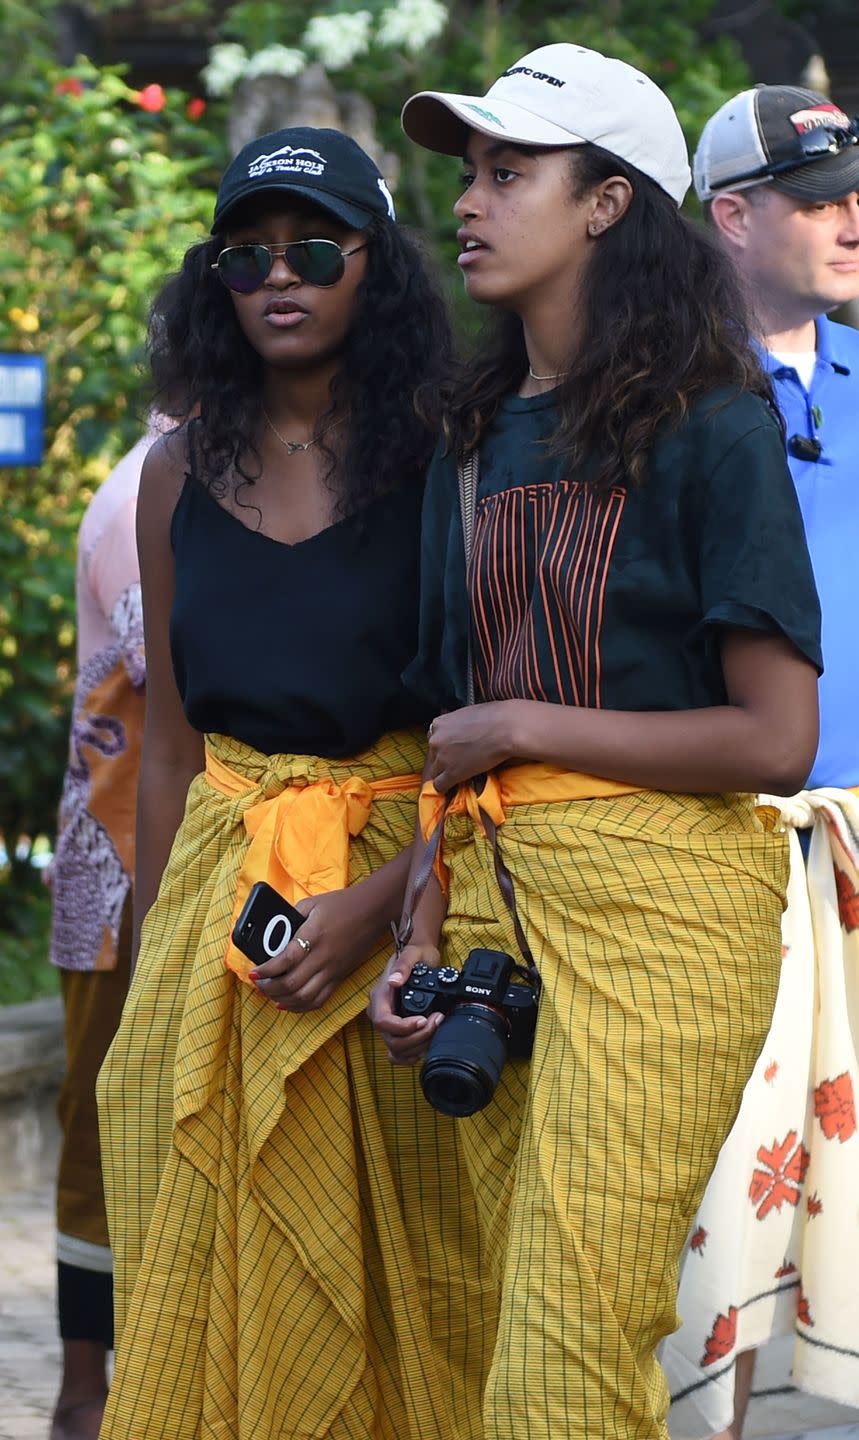 <p>Americans quite literally saw Malia and Sasha Obama grow up before their eyes, since Sasha was 7 and Malia was 10 when their dad became President. Throughout his eight years in the White House, the girls' style matured as time passed.</p>